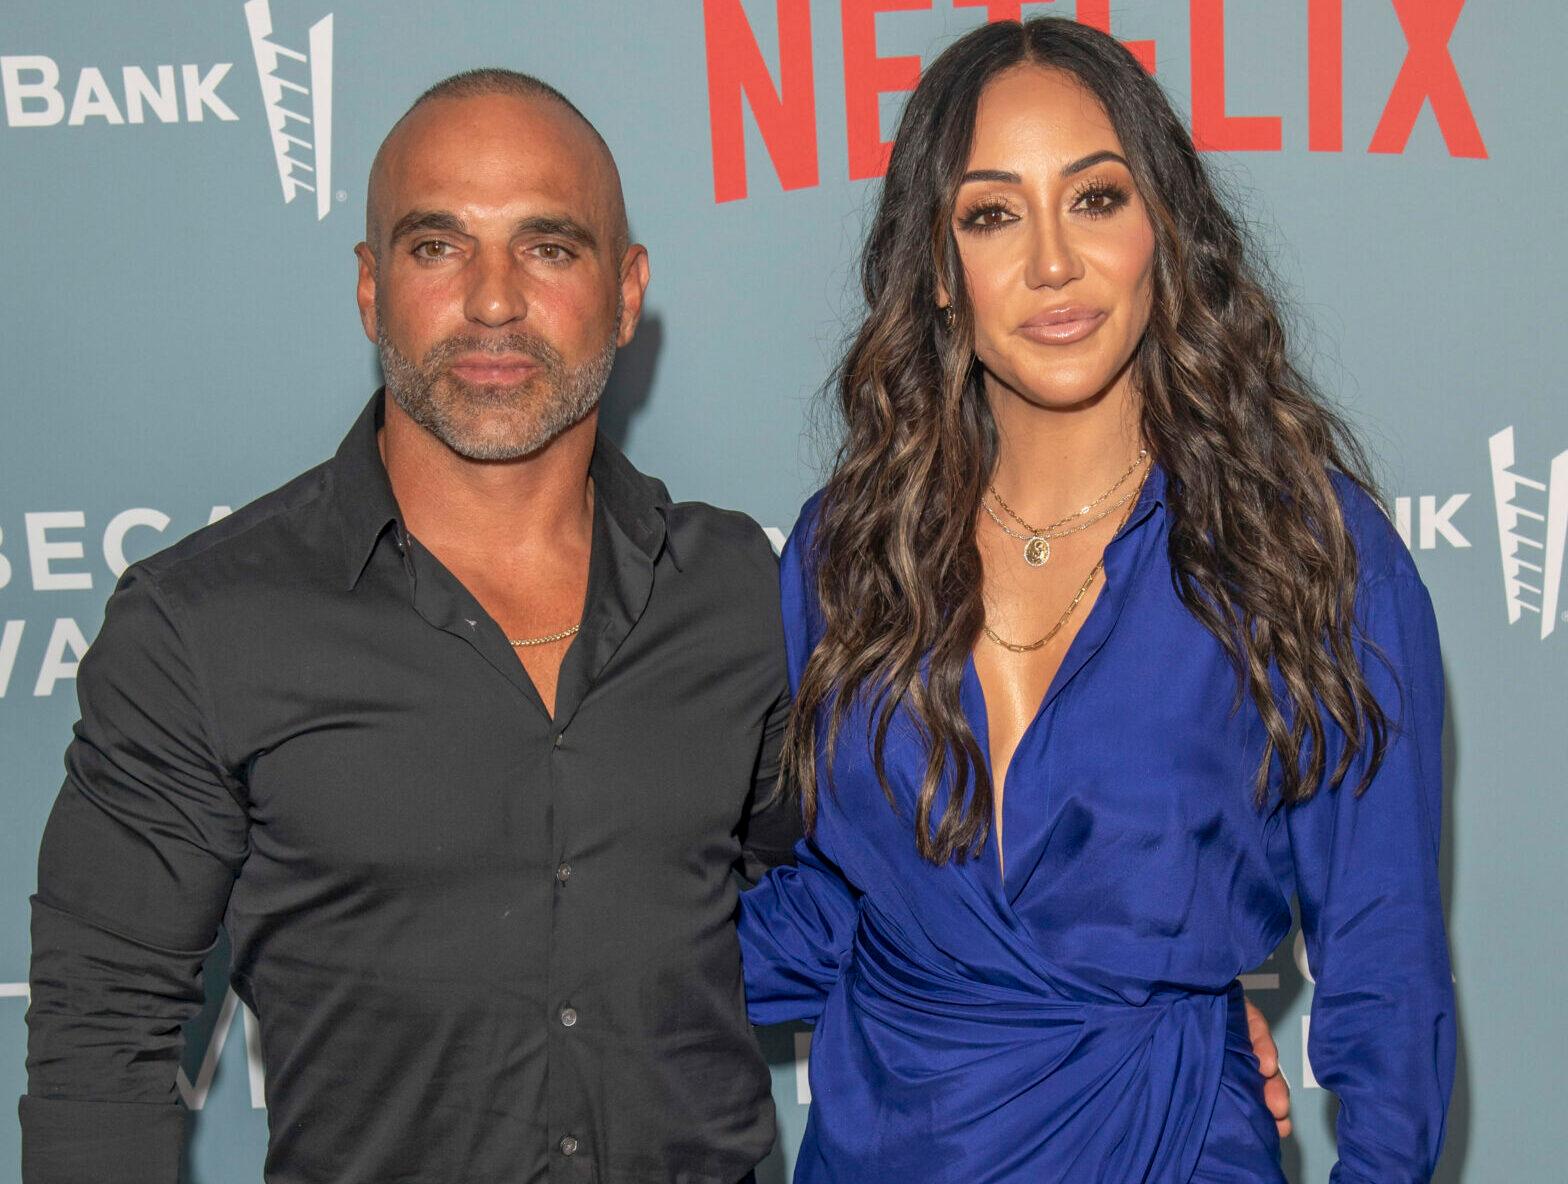 Joe Gorga and Melissa Gorga attend the "Halftime" Premiere during the Tribeca Film Festival Opening Night at United Palace on June 08 2022 in New York City.